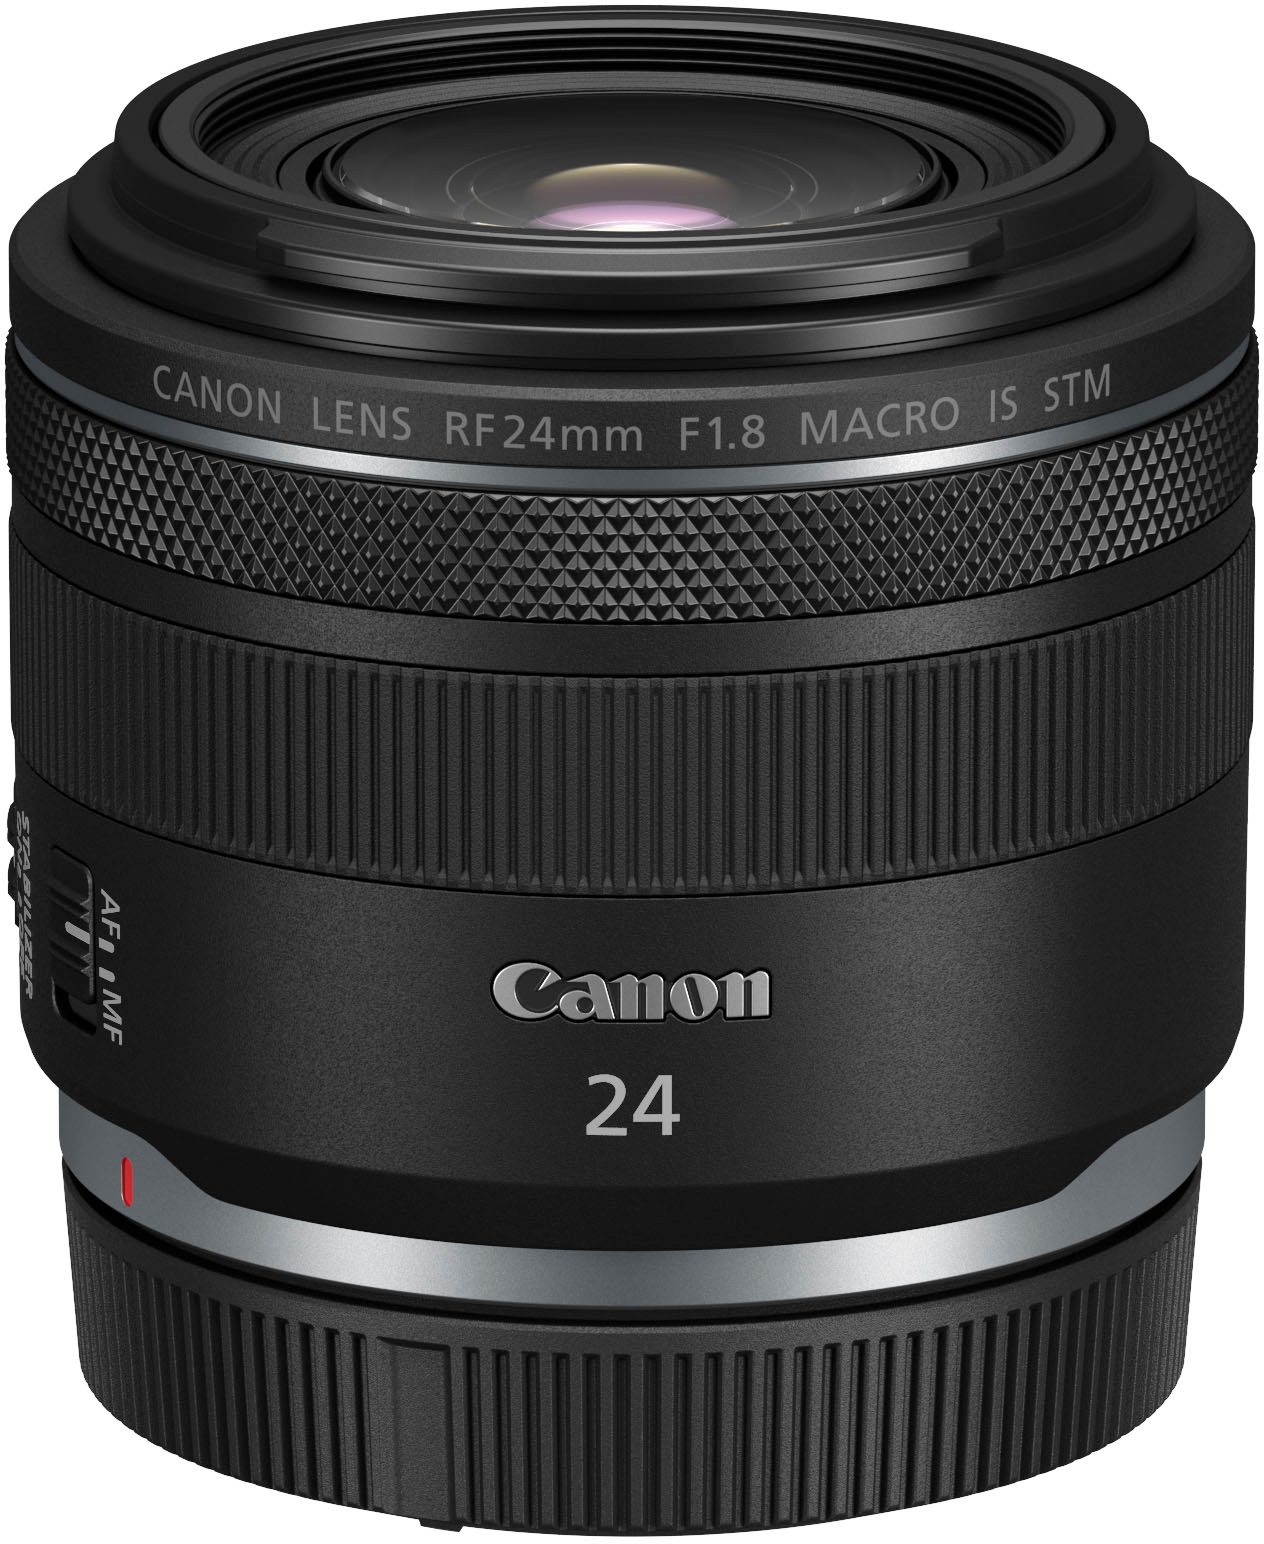 Back View: Canon - RF 24mm F1.8 MACRO IS STM Wide Angle Prime Lens for EOS R-Series Cameras - Black